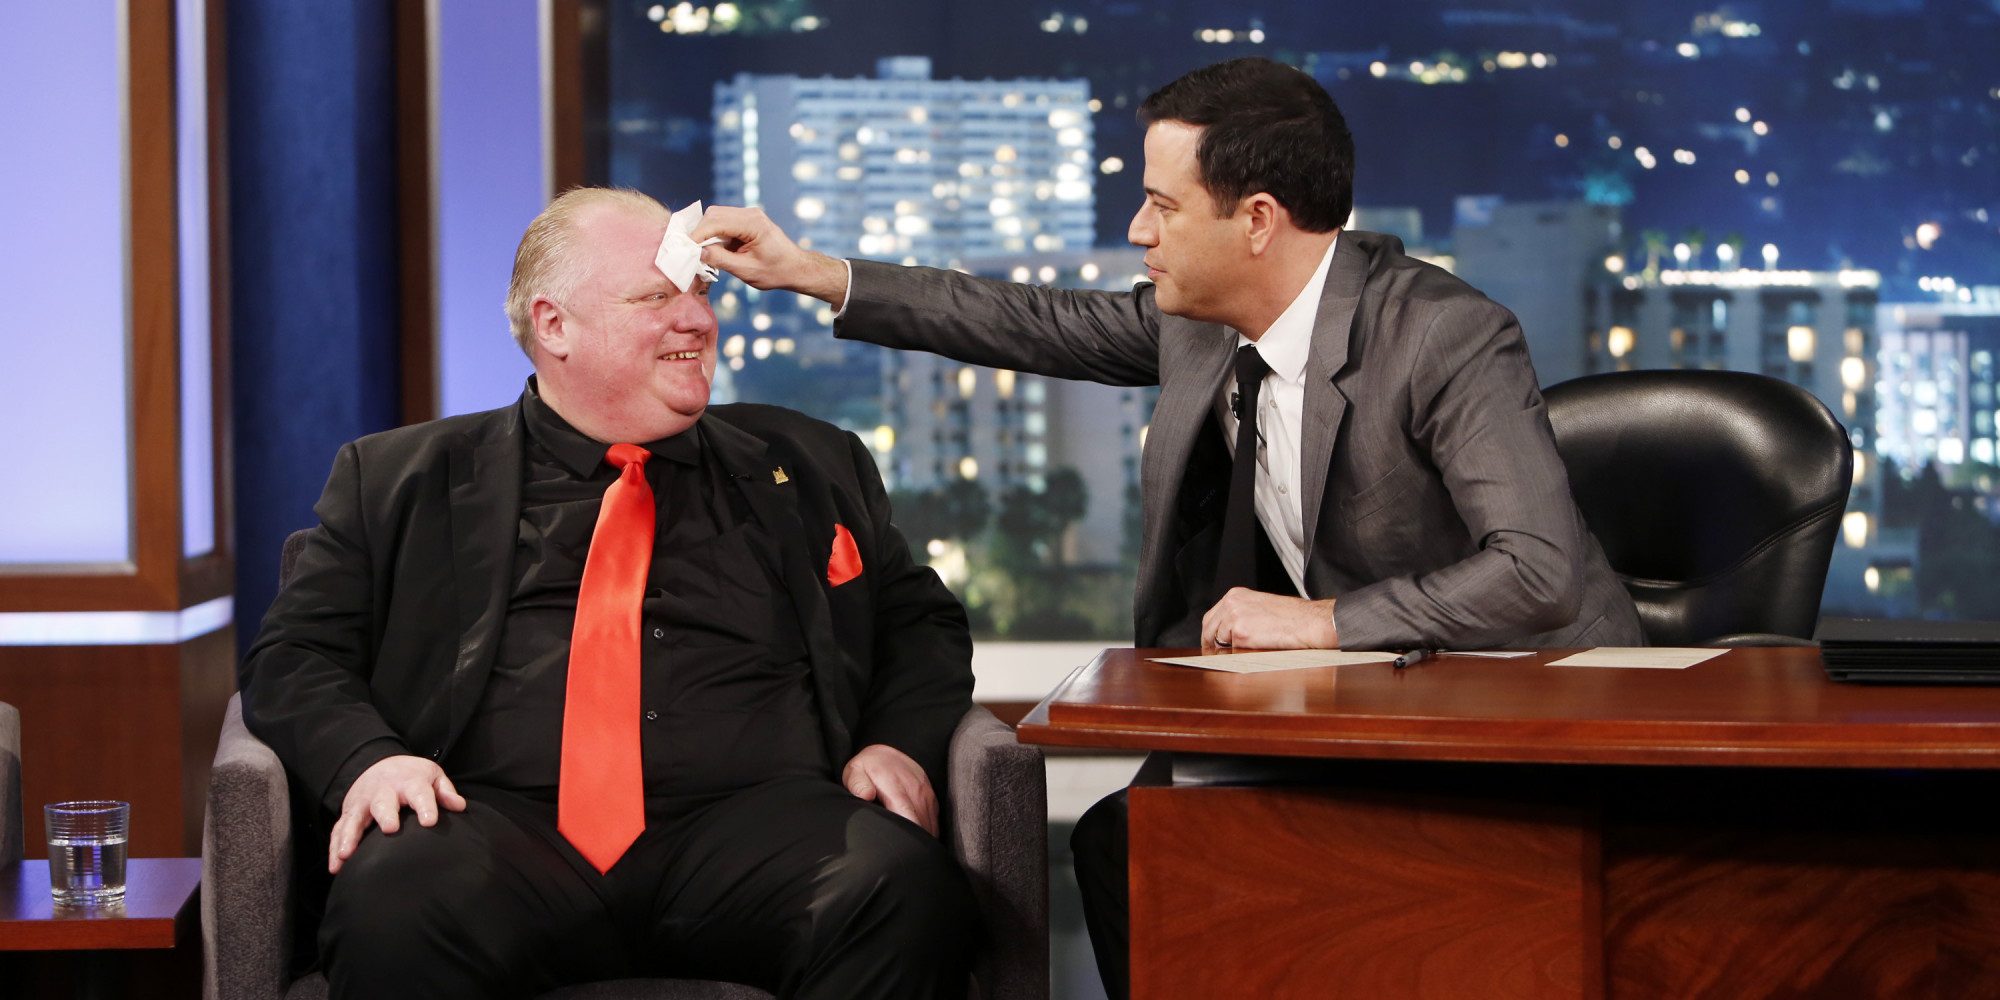 Video of rob ford on jimmy kimmel show #2